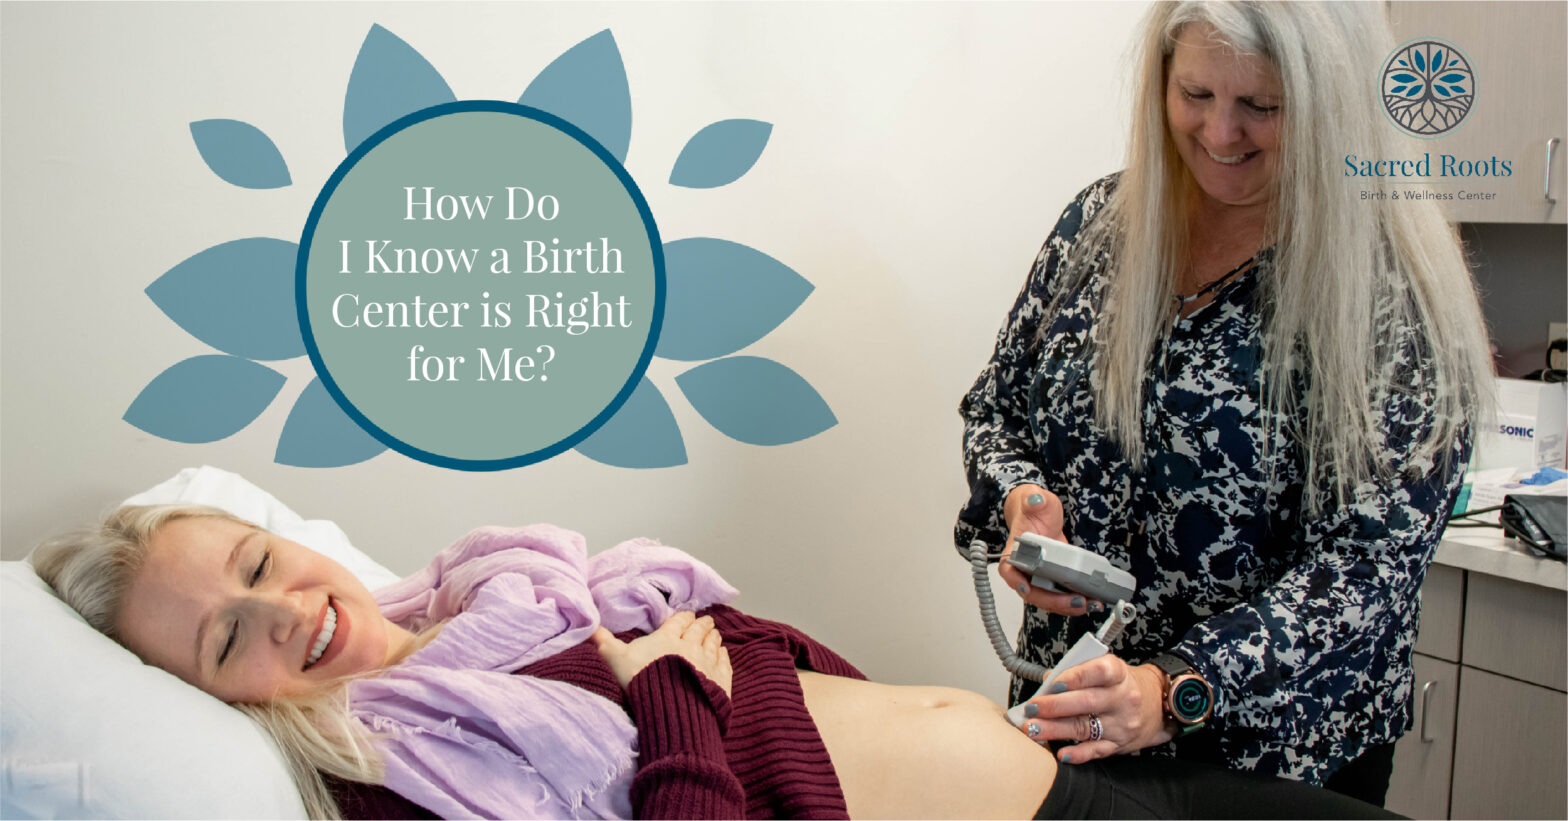 How Do I Know a Birth Center is Right for Me?